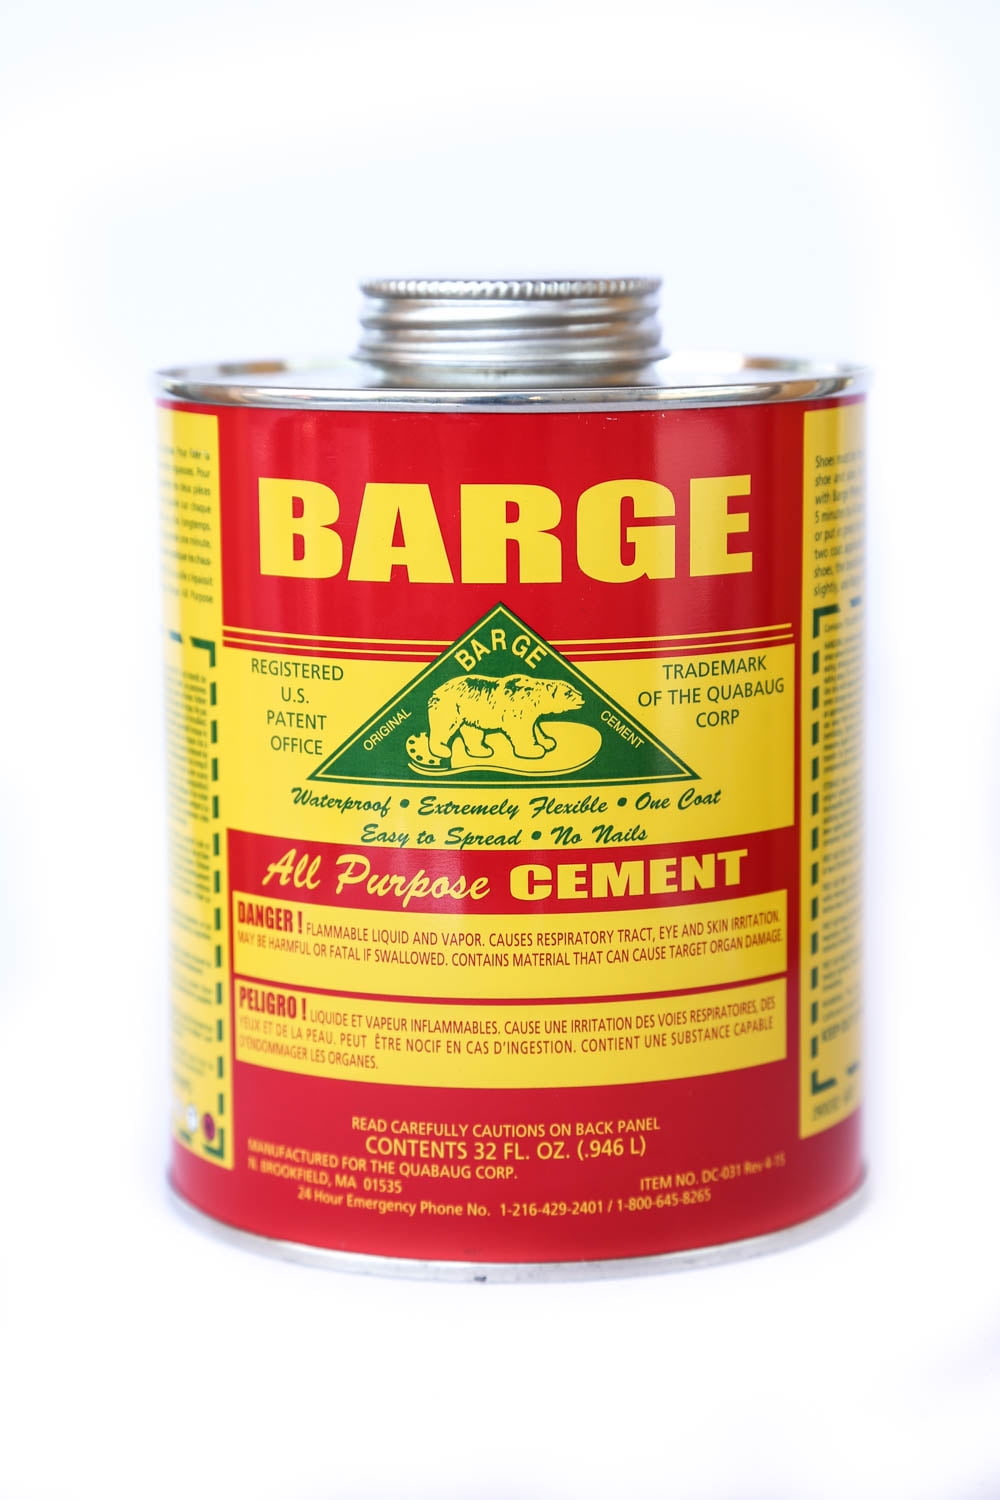 Barge All-Purpose Cement Rubber Leather Shoe Waterproof Glue 1 Quart